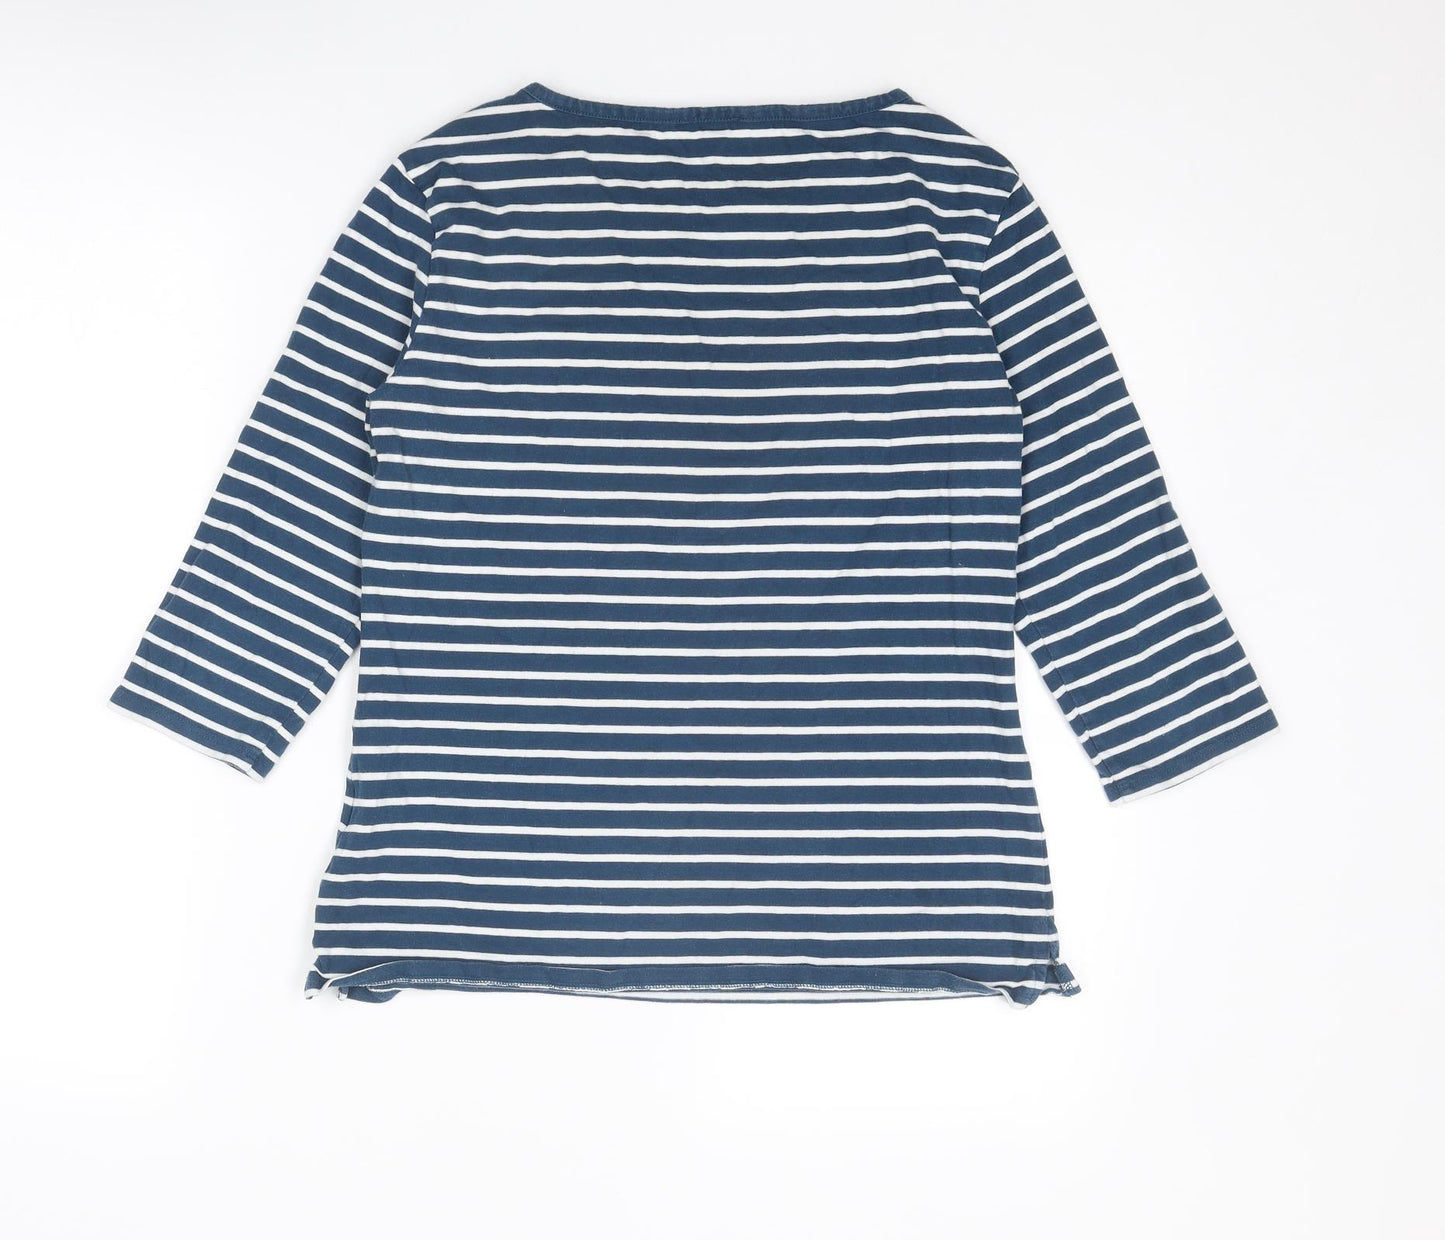 Kettlewell Womens Blue Striped Cotton Basic T-Shirt Size M Round Neck